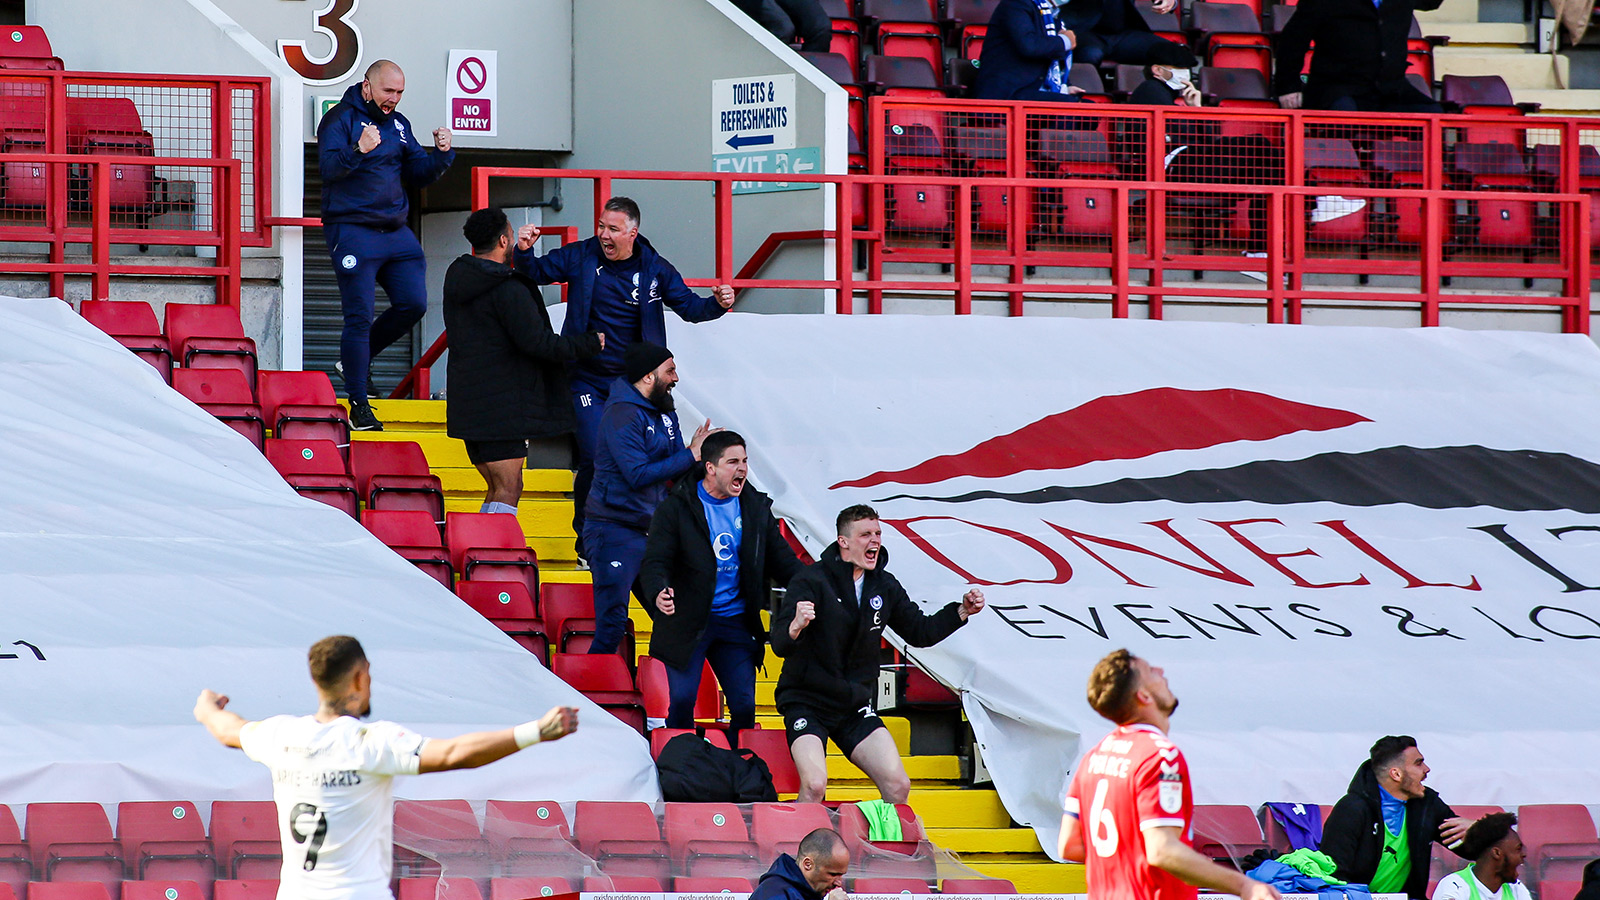 24th April '21 | Darren Ferguson celebrates in the stands as Posh record a pivitol victory at Charlton Athletic